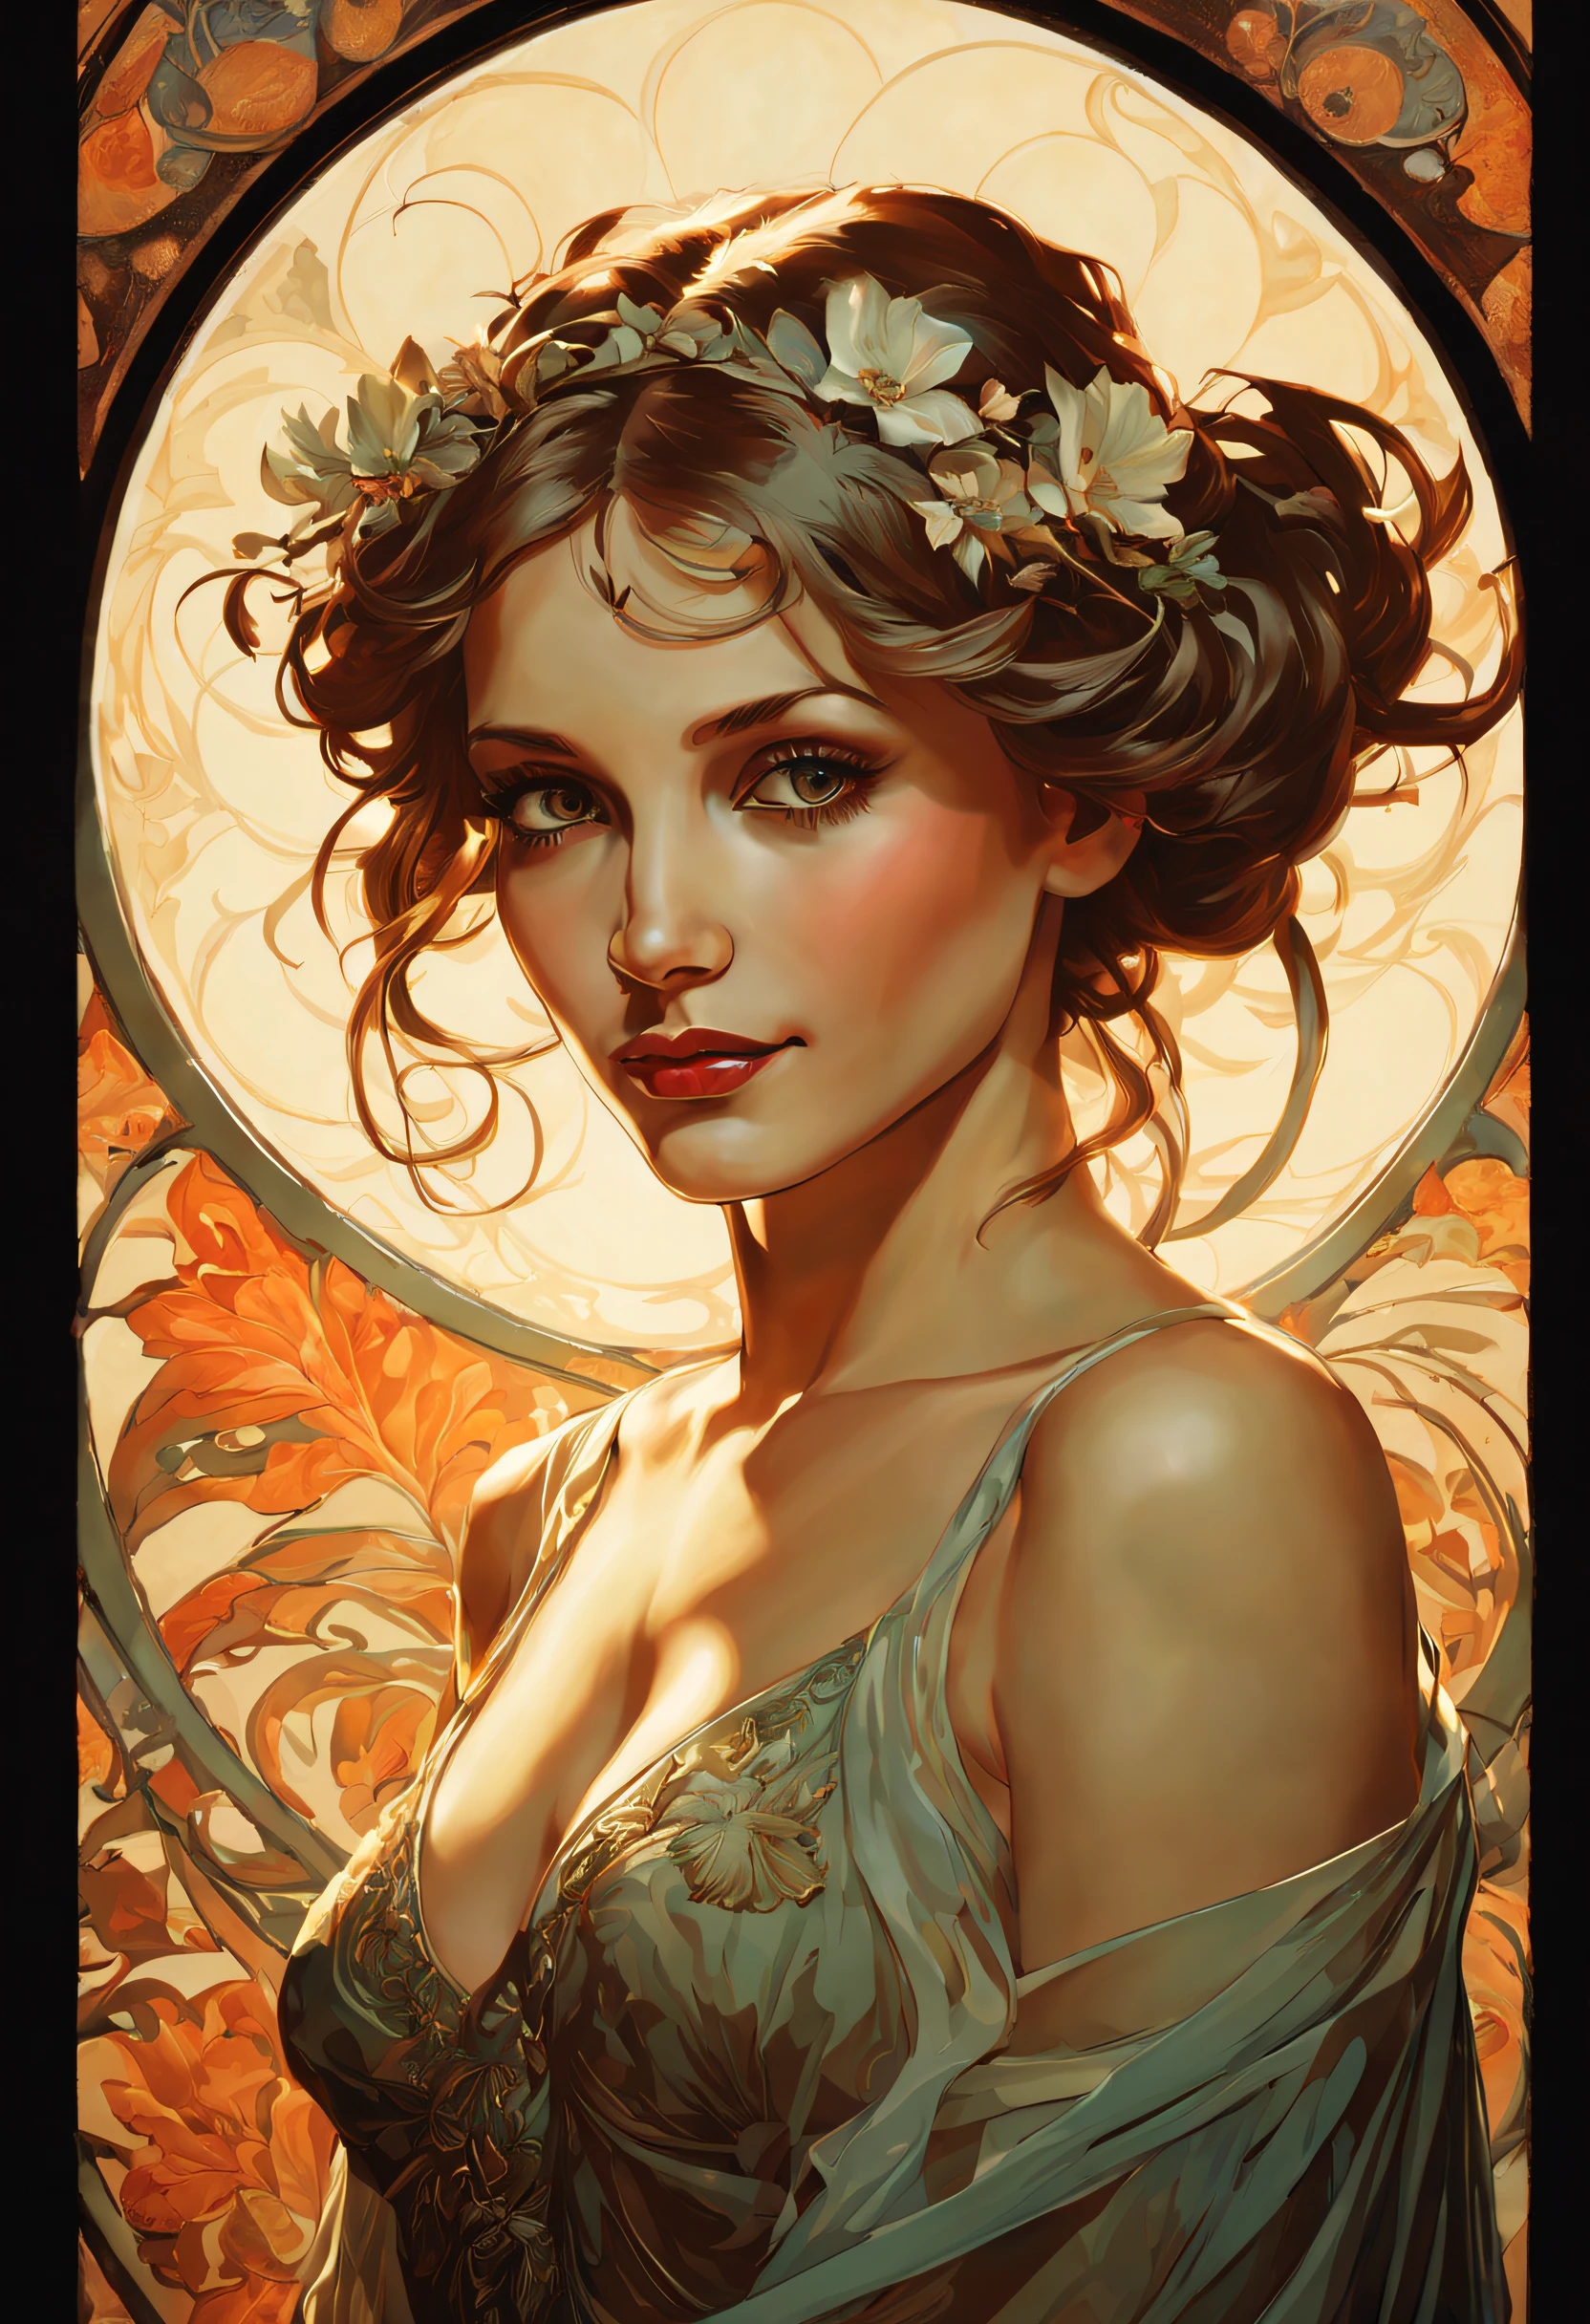 (evil smile:1.1,Contemporary art:1.1,by Alfons Mucha,backlighting:1.1,best quality,ultra-detailed,realistic)

A girl with an evil smile standing confidently in a dark room, illuminated by a soft backlight. Her smile is mischievous and captivating, with a hint of wickedness. The art style of the image is reminiscent of the works of Alfons Mucha, with intricate details and flowing lines. The girl's expression is the focal point, highlighting her mysterious and alluring nature. The use of backlighting creates a dramatic effect, casting long shadows and emphasizing the contours of her face. The image is of the highest quality, with ultra-detailed features and a photorealistic rendering. The colors used are vivid and rich, adding depth and intensity to the scene. The overall lighting is carefully designed, with a play of light and shadow that adds to the atmosphere of the image.